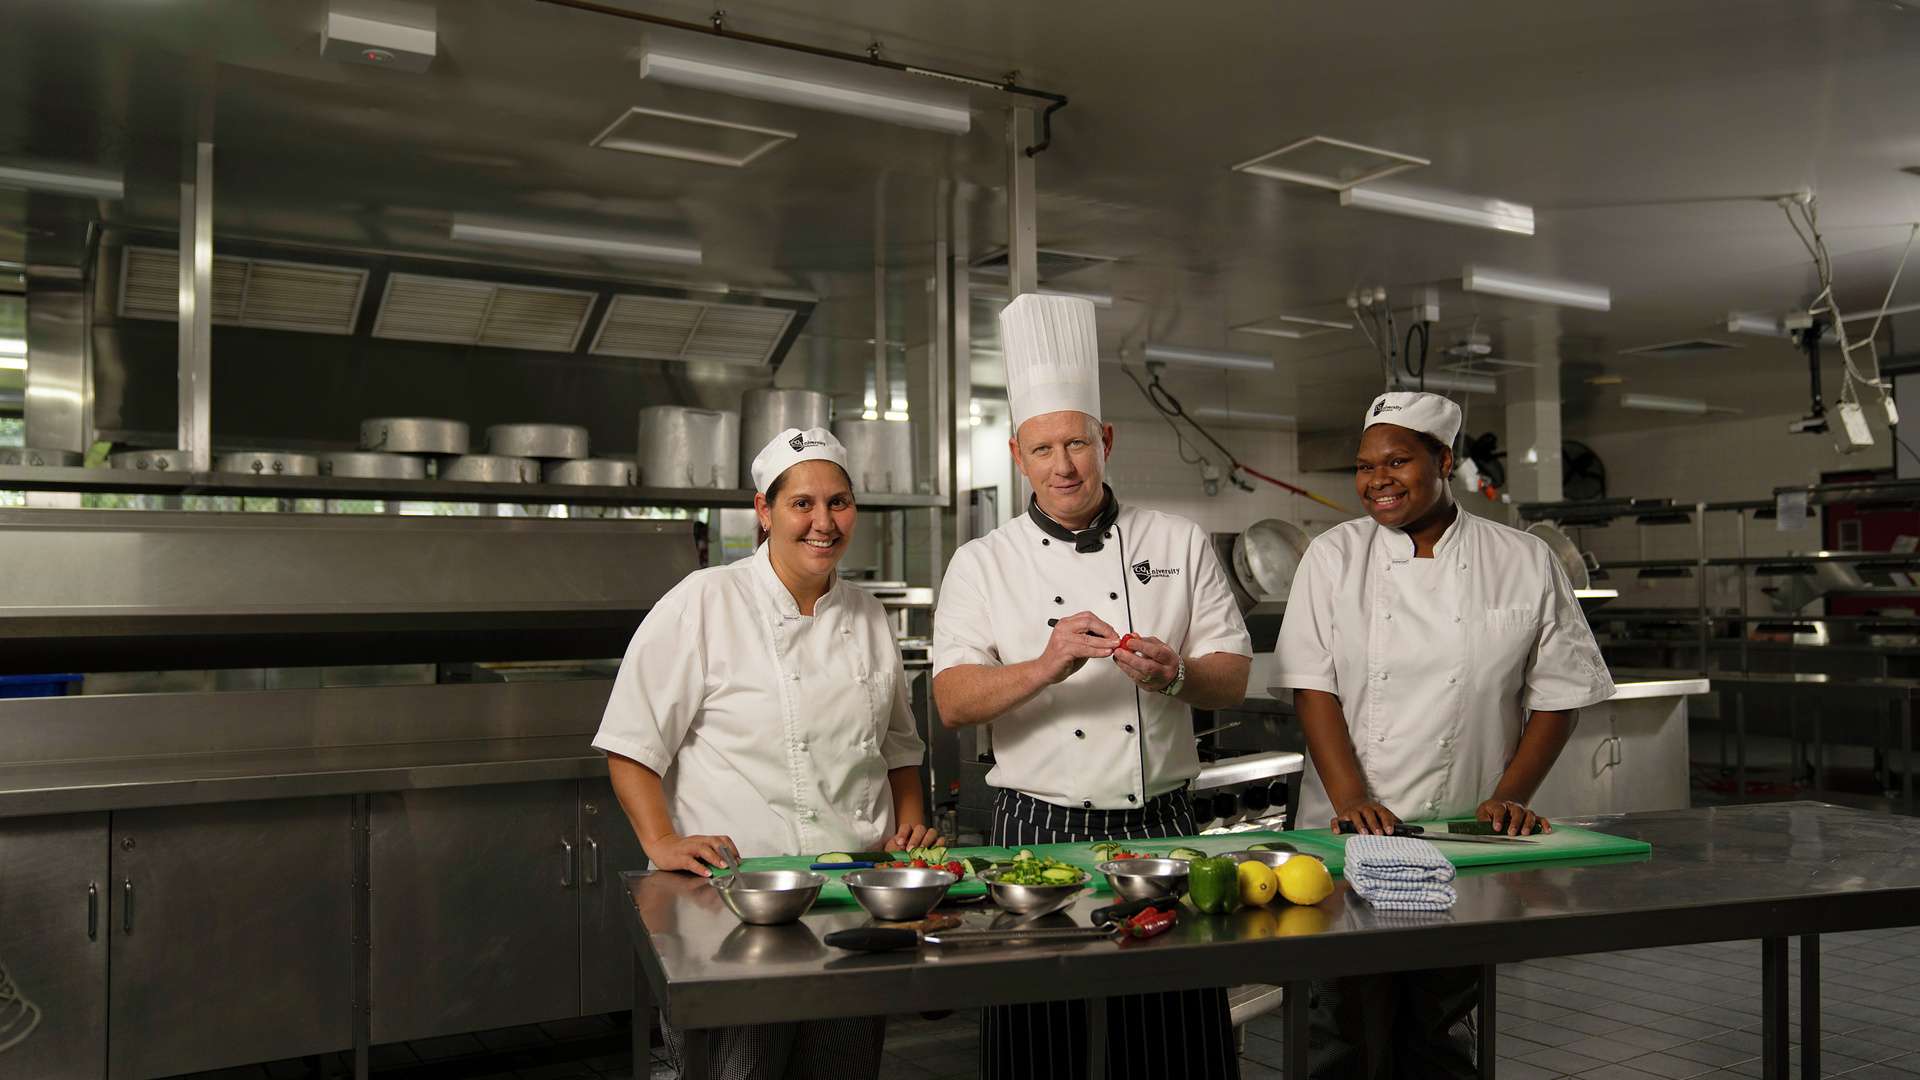 Two hospitality students and teacher in kitchen smiling at camera.